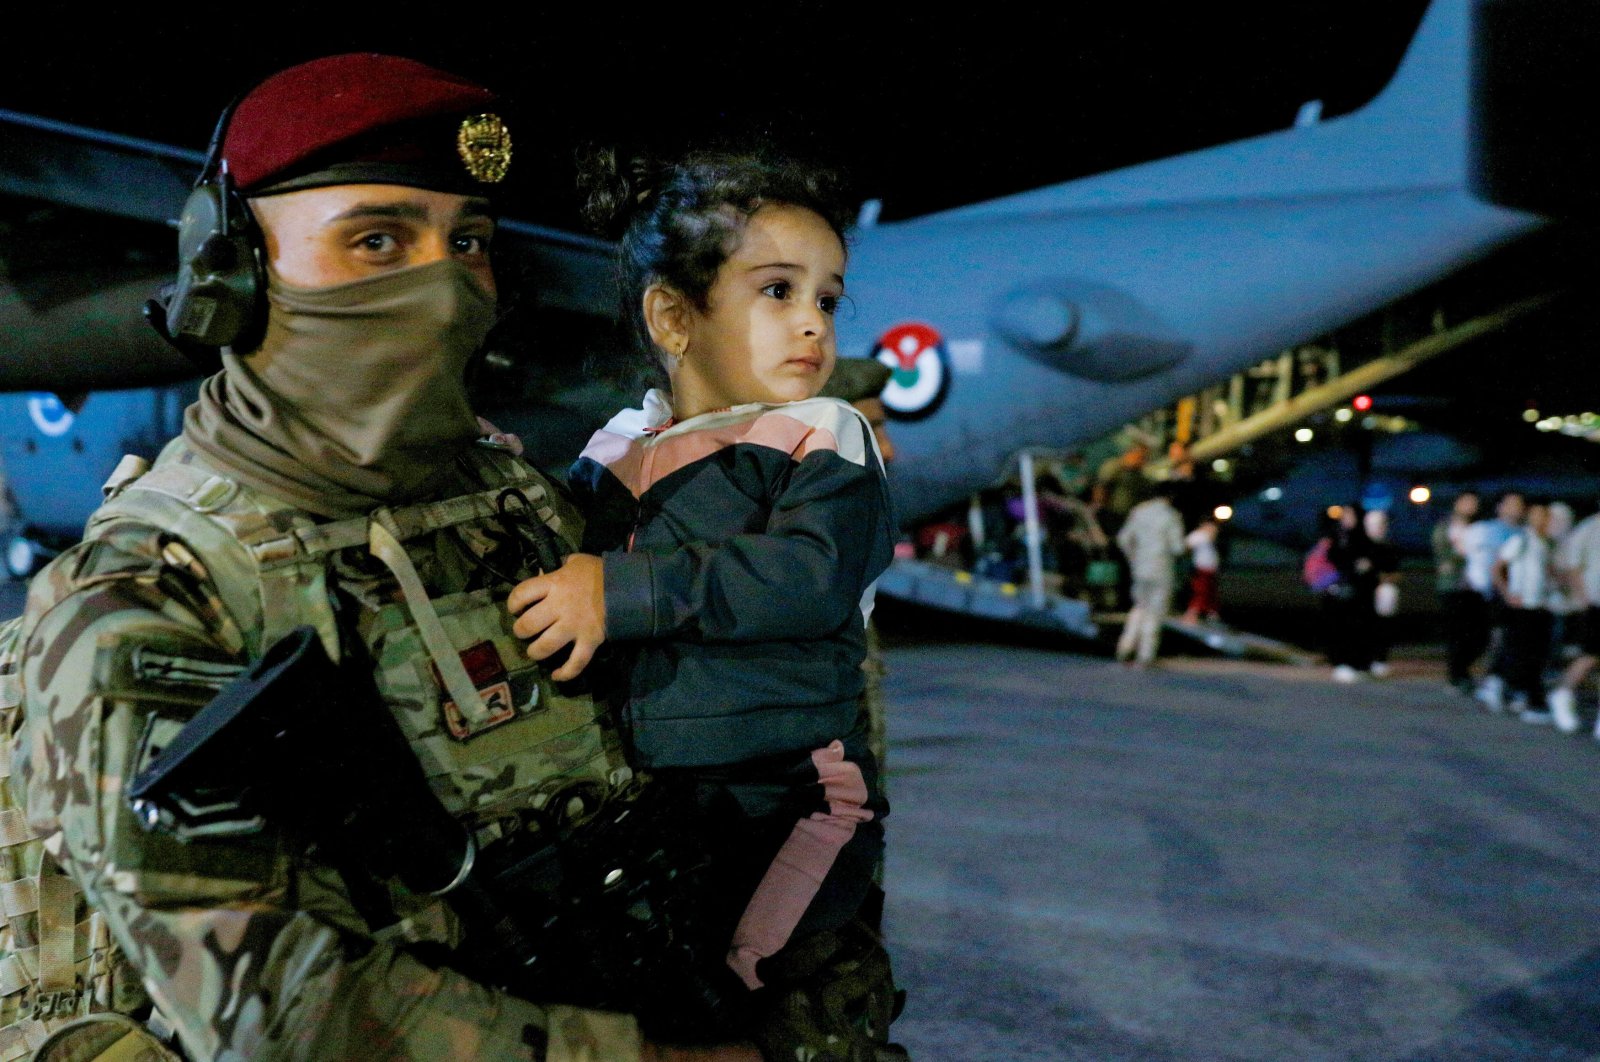 A Jordanian soldier carries a child as people are evacuated from Sudan disembark an aircraft at a military airport in Amman, Jordan, April 24, 2023. (AFP Photo)